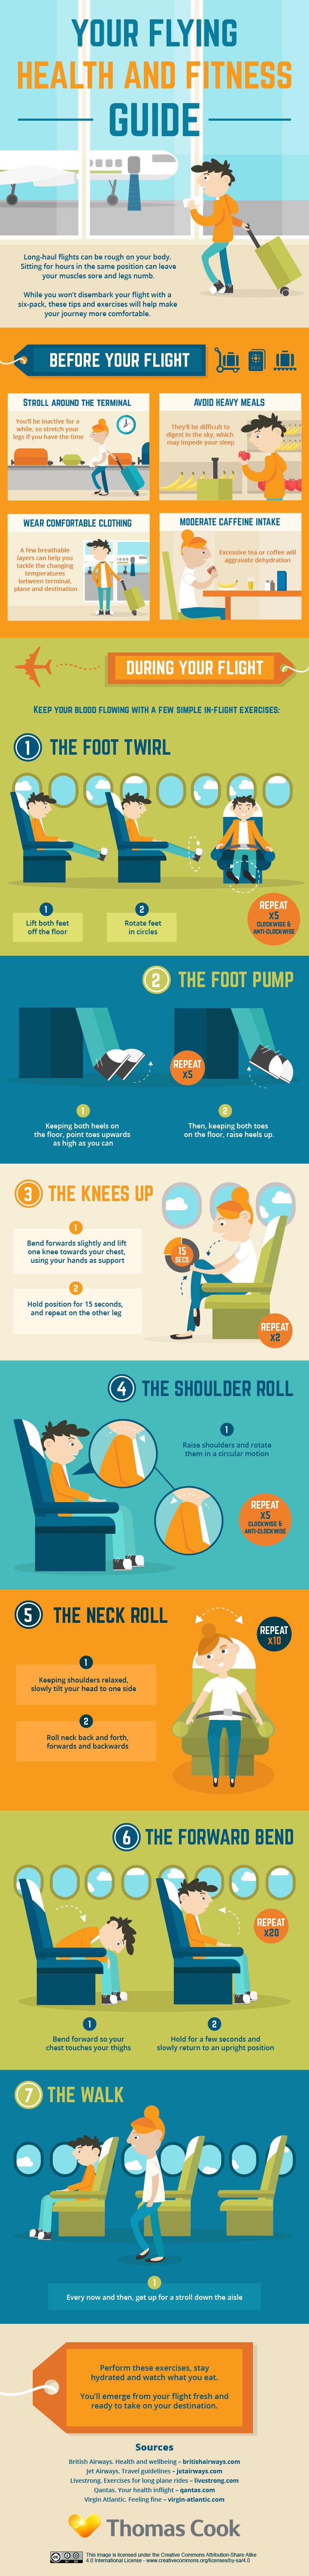 Your flying health and fitness guide infographic 